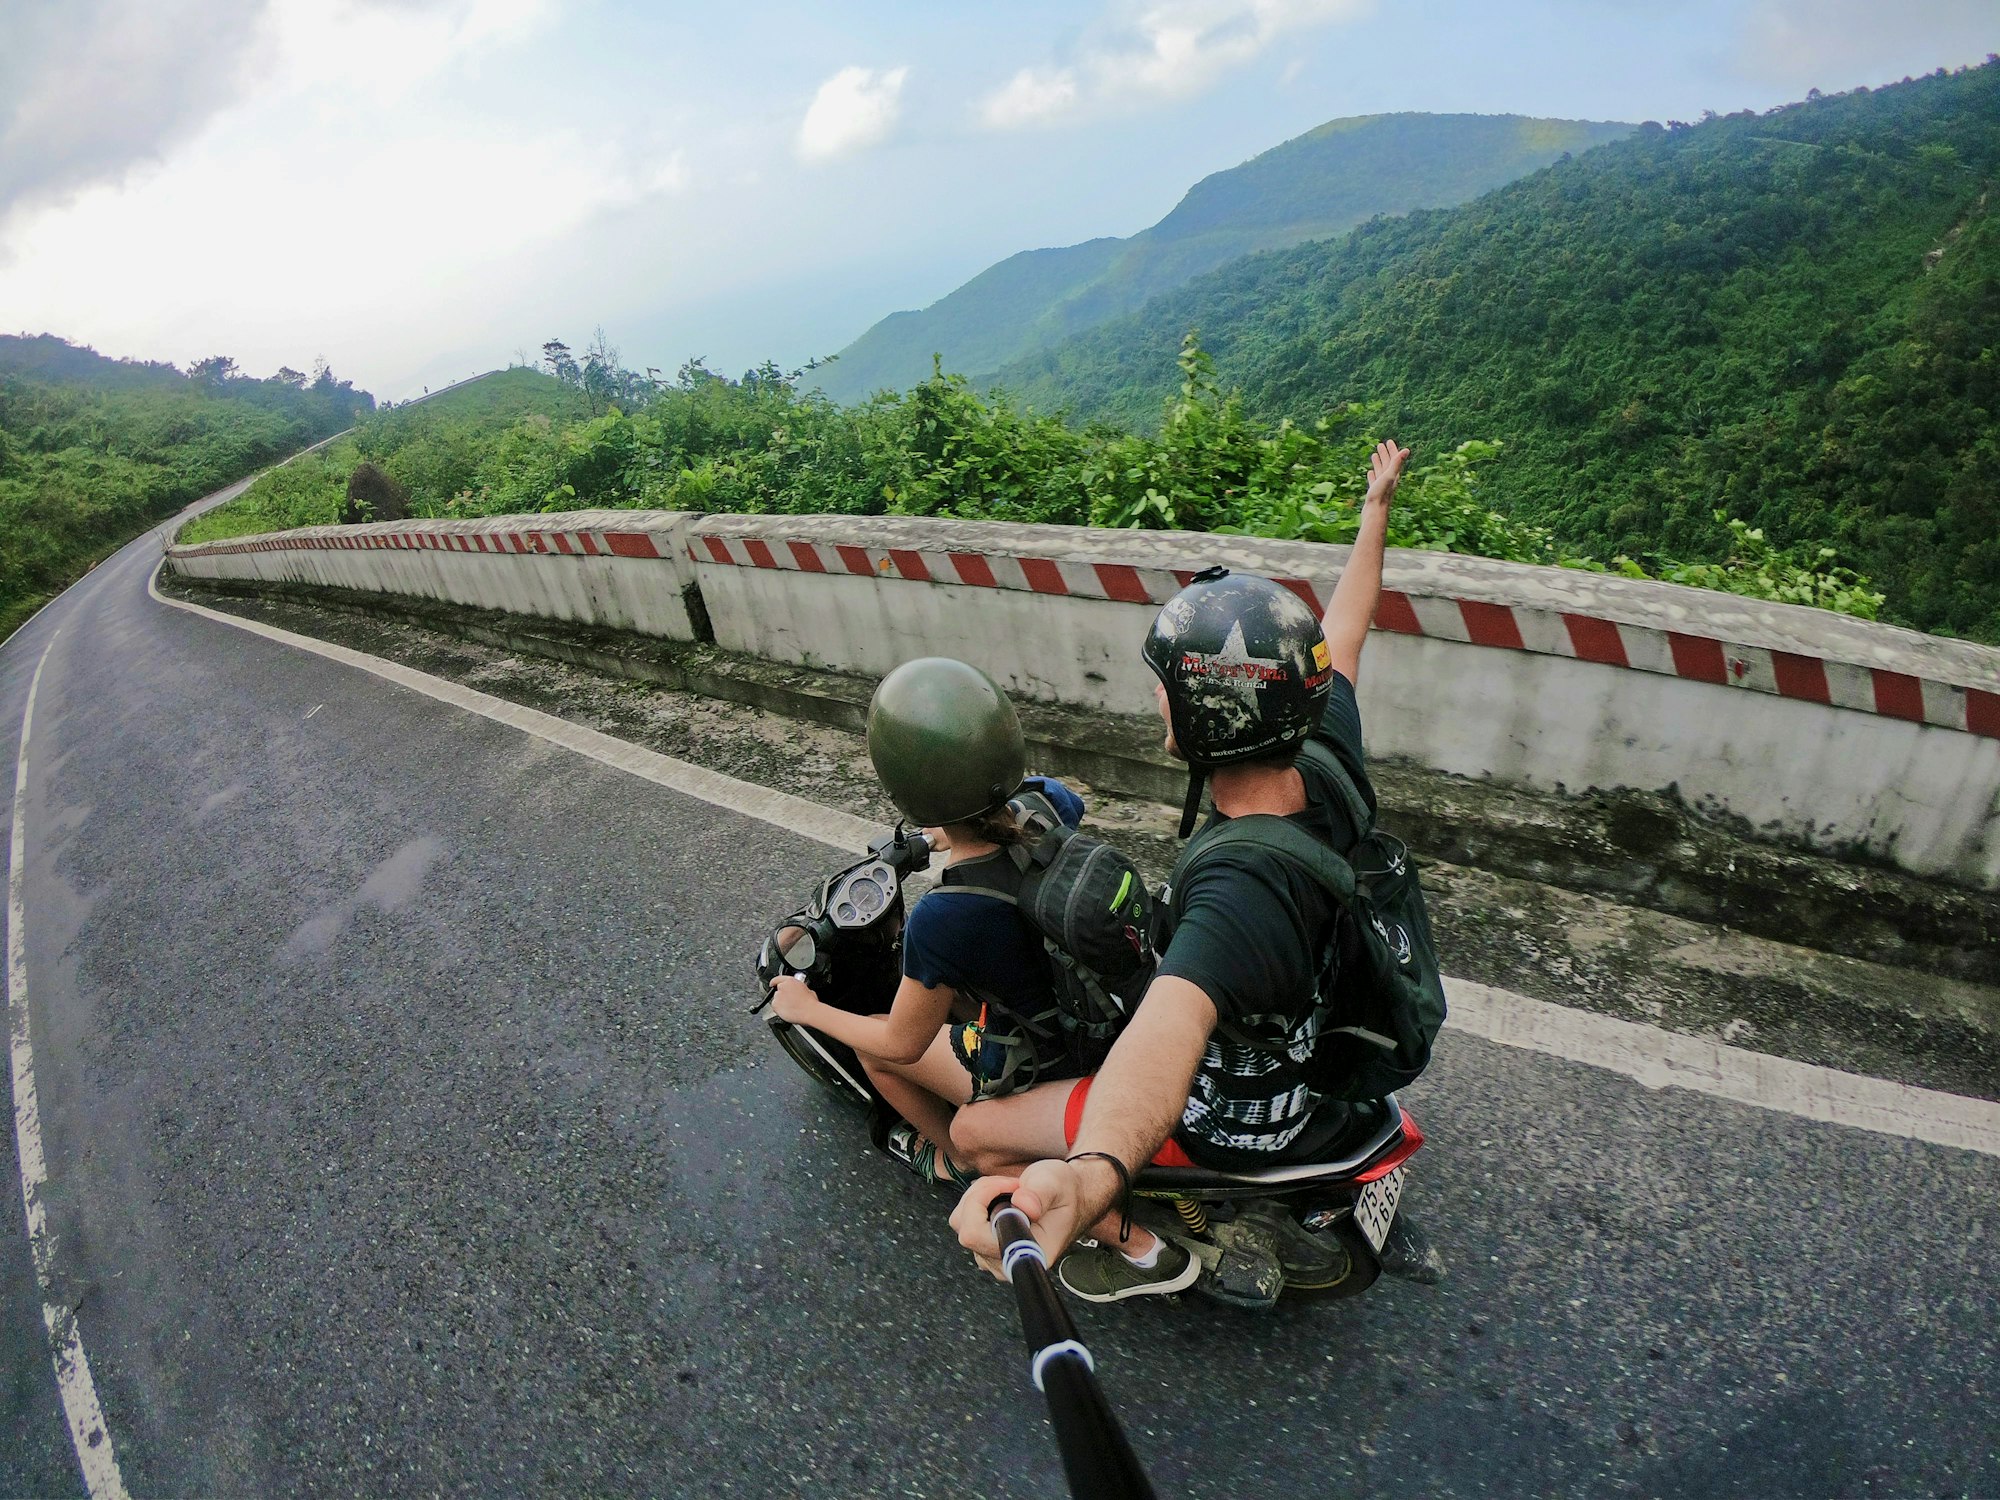 This was my favorite memory and experience in Vietnam. We traveled from Hoi An to Hue via motorbike along the hai van pass. It was absolutely breathtaking and led to some unreal views and vistas.